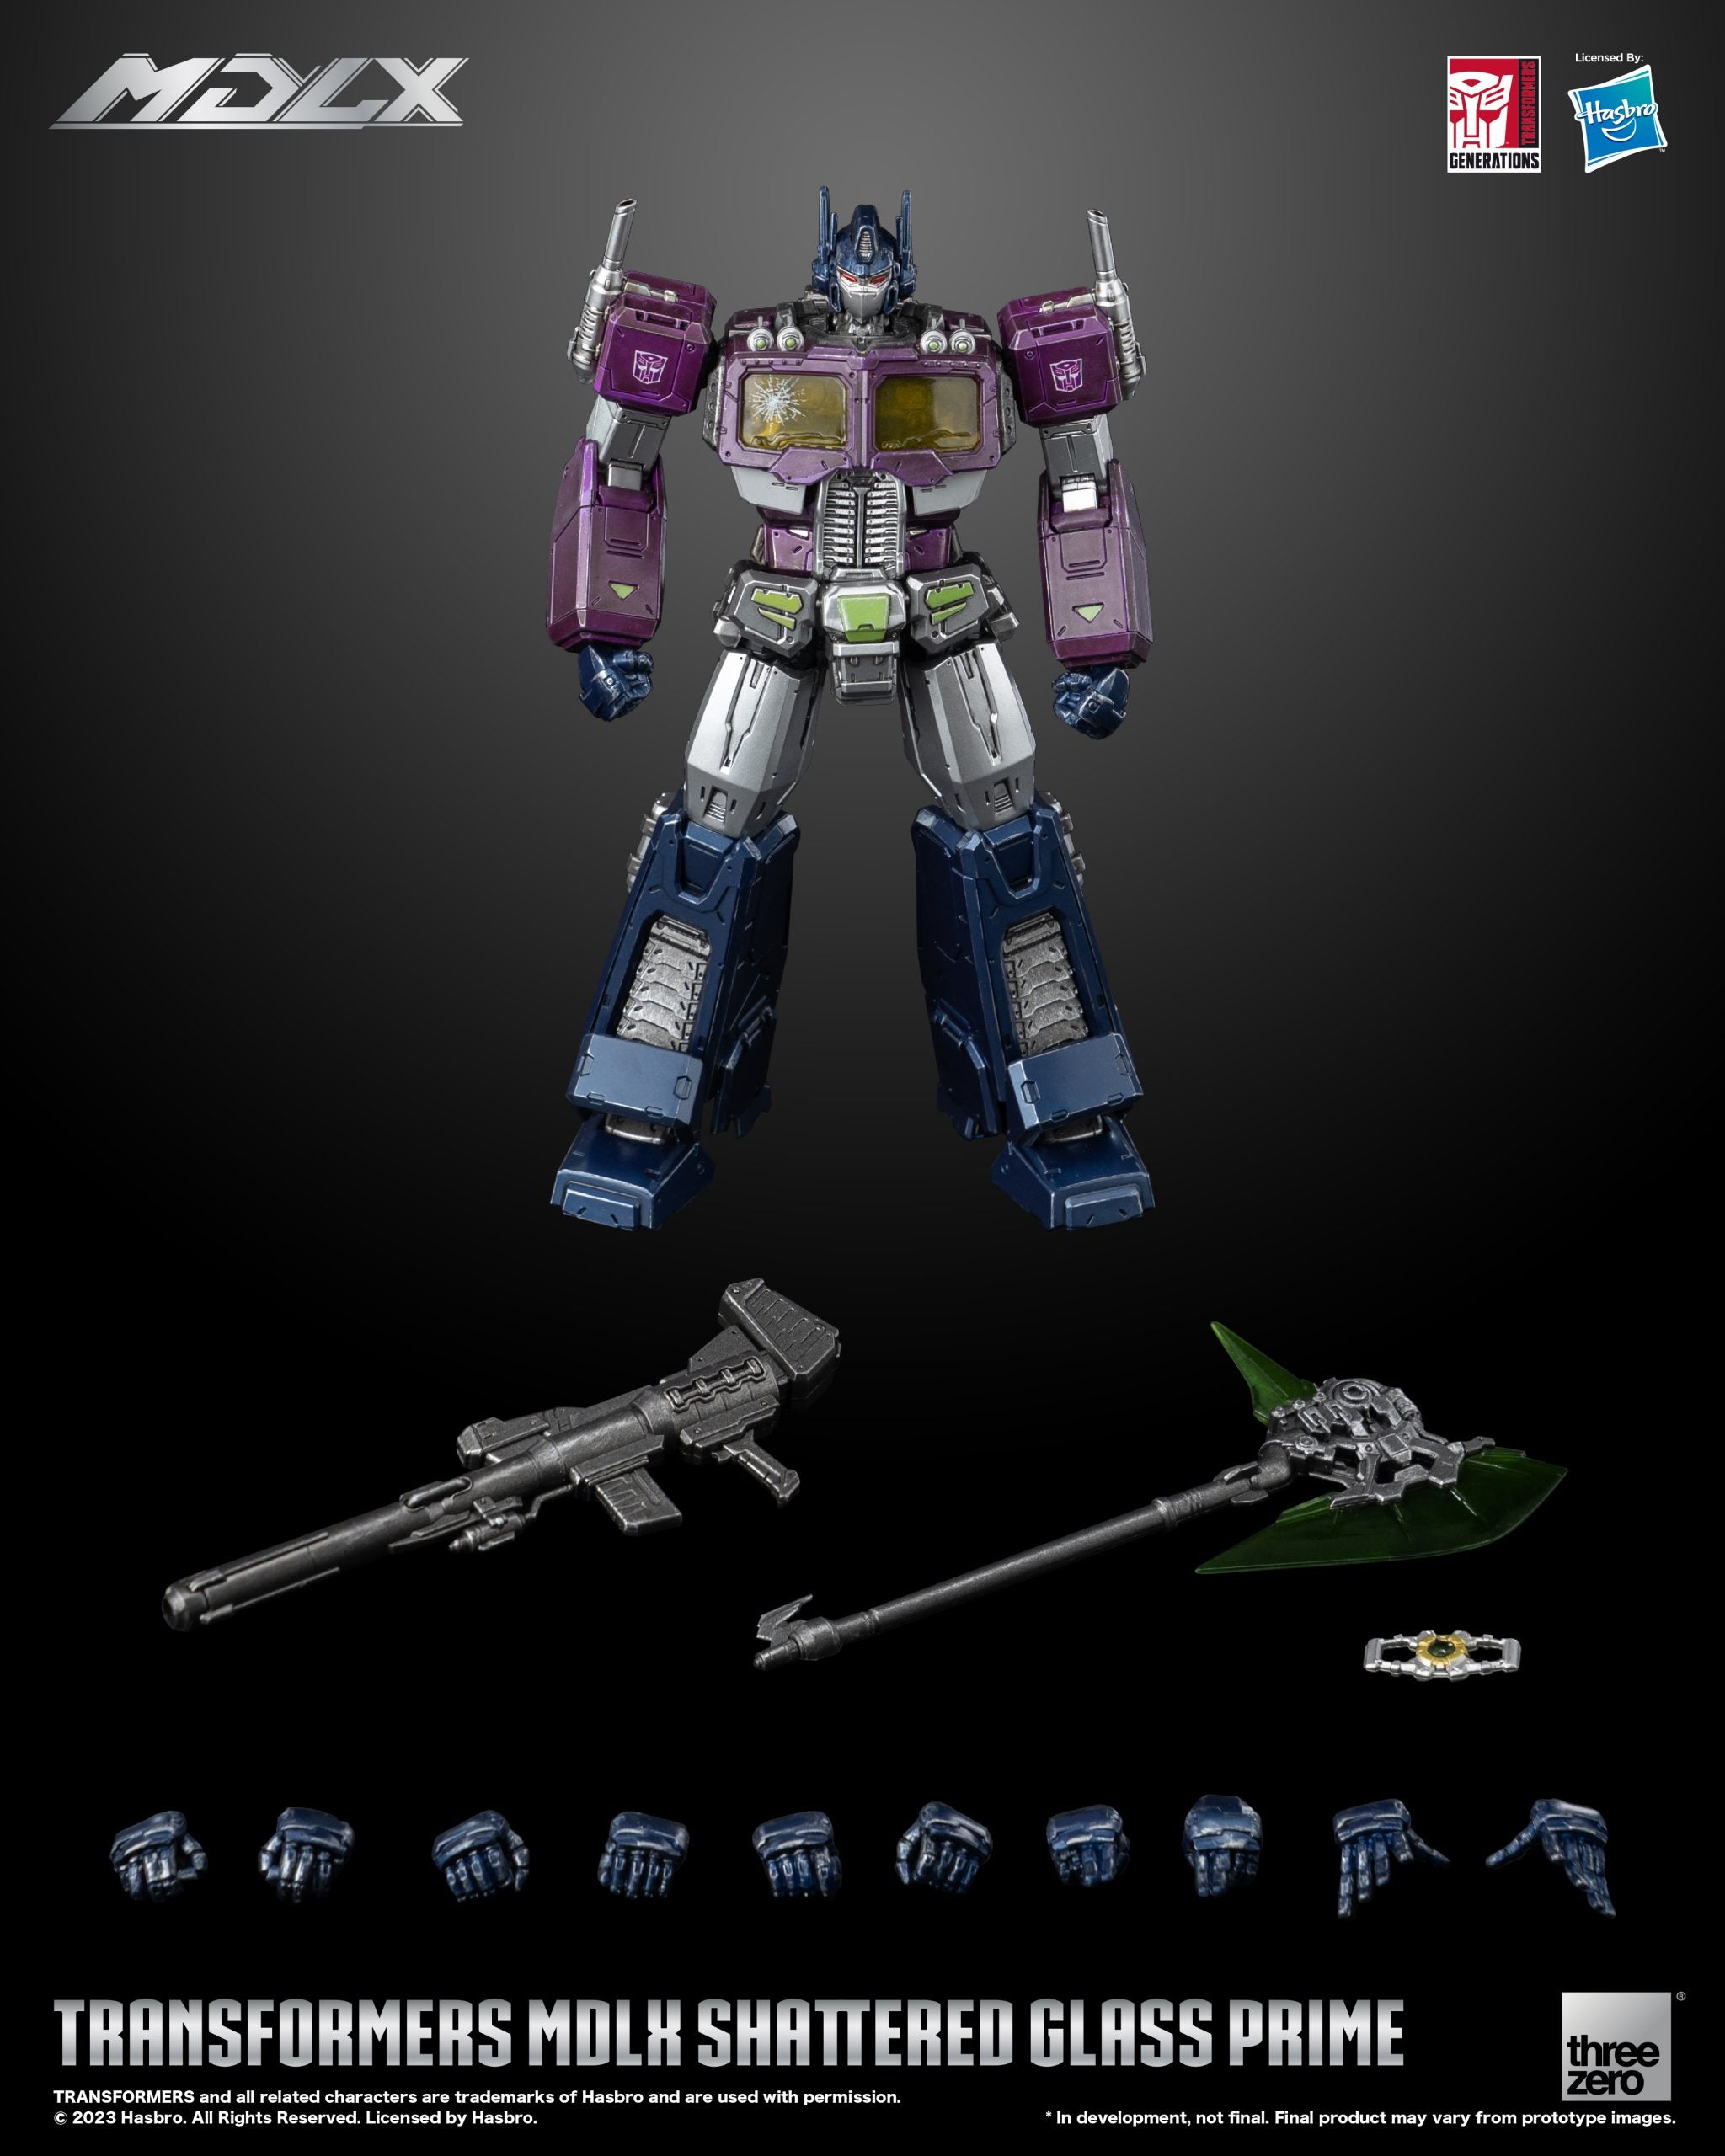 Transformers MDLX Shattered Glass Optimus Prime